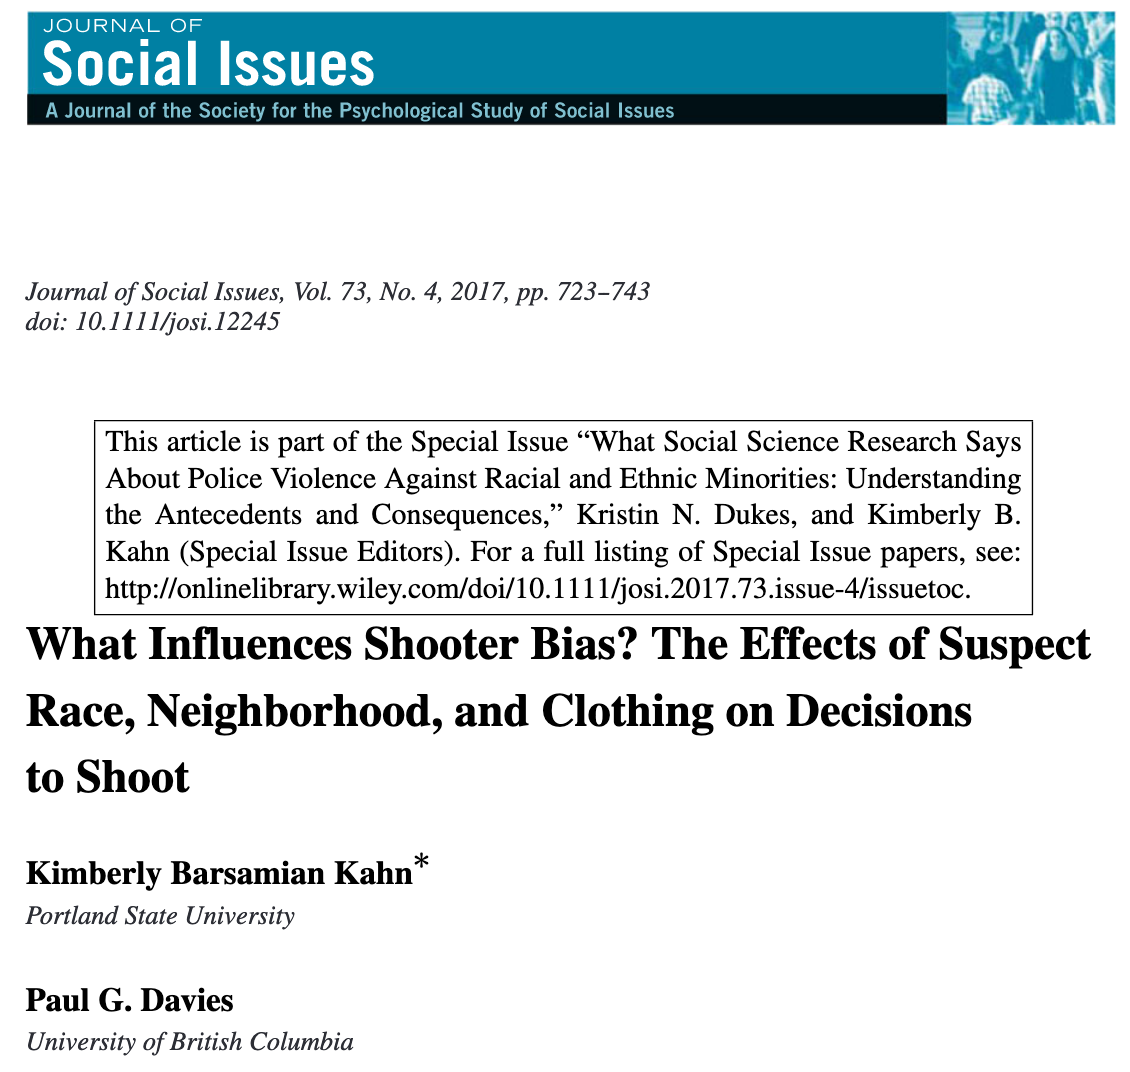 599/ "Unarmed Black targets in threatening attire were marginally more likely to be mistakenly shot compared to unarmed White targets in threatening attire ... Marginally more errors were also made against unarmed Blacks in threatening attire compared to Blacks in safe attire."